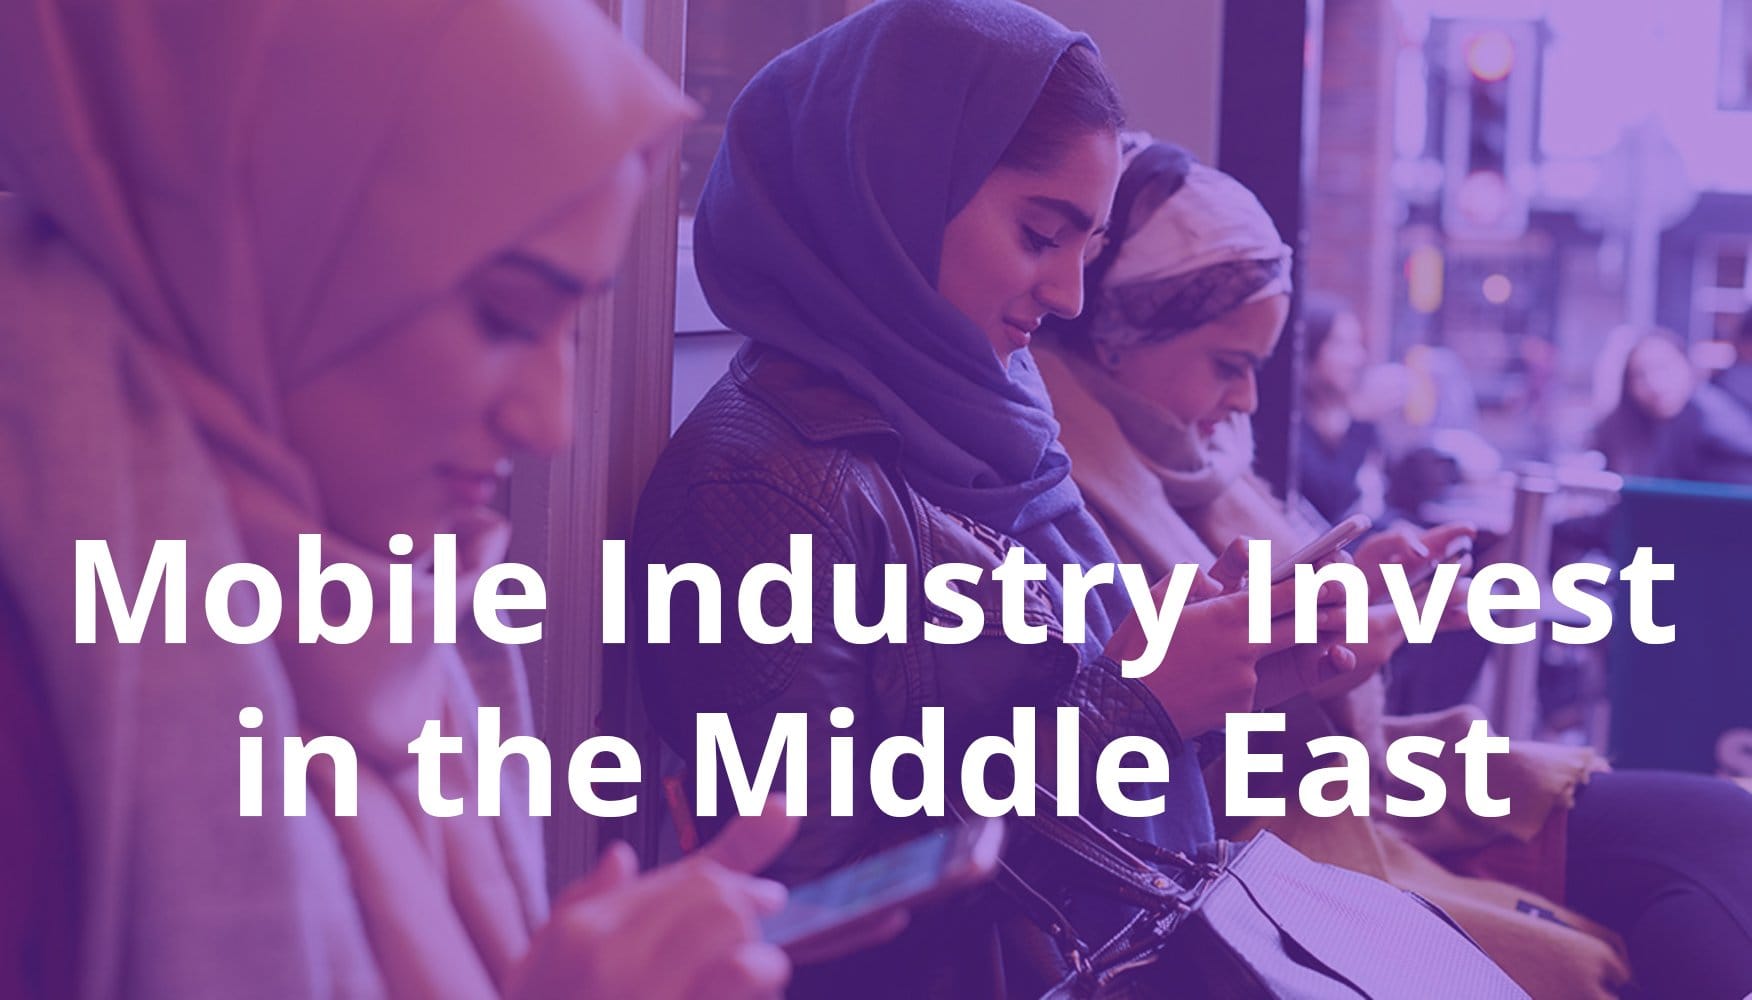 Mobile industry invest in the Middle East: ad spending has increased by 233%